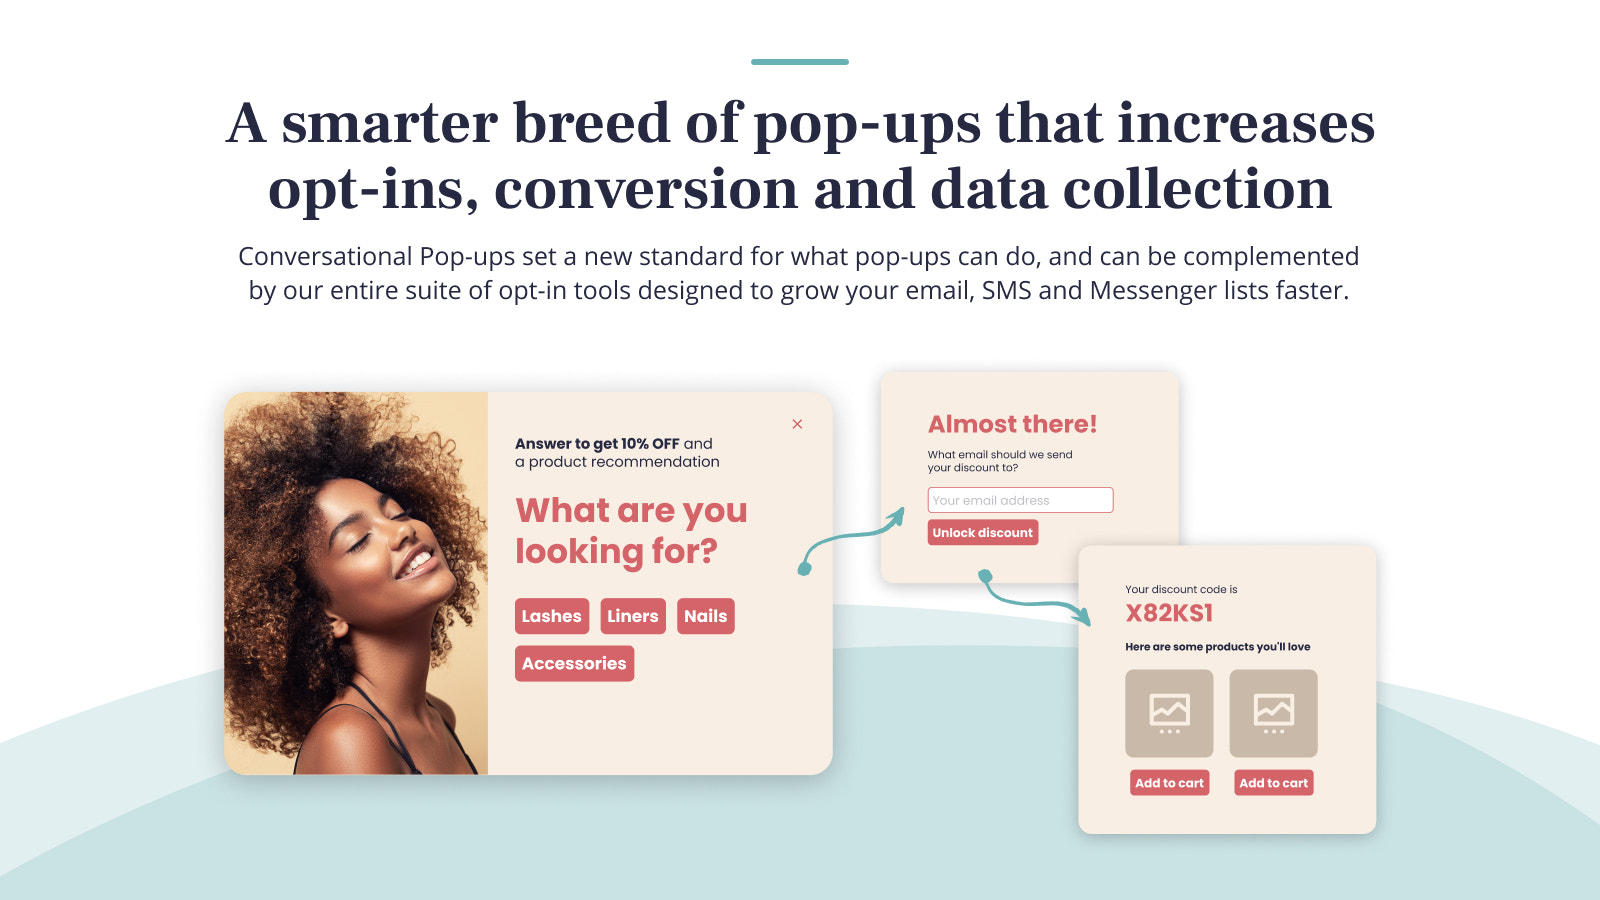 Conversational Pop-ups are the new way to collect data & opt-ins